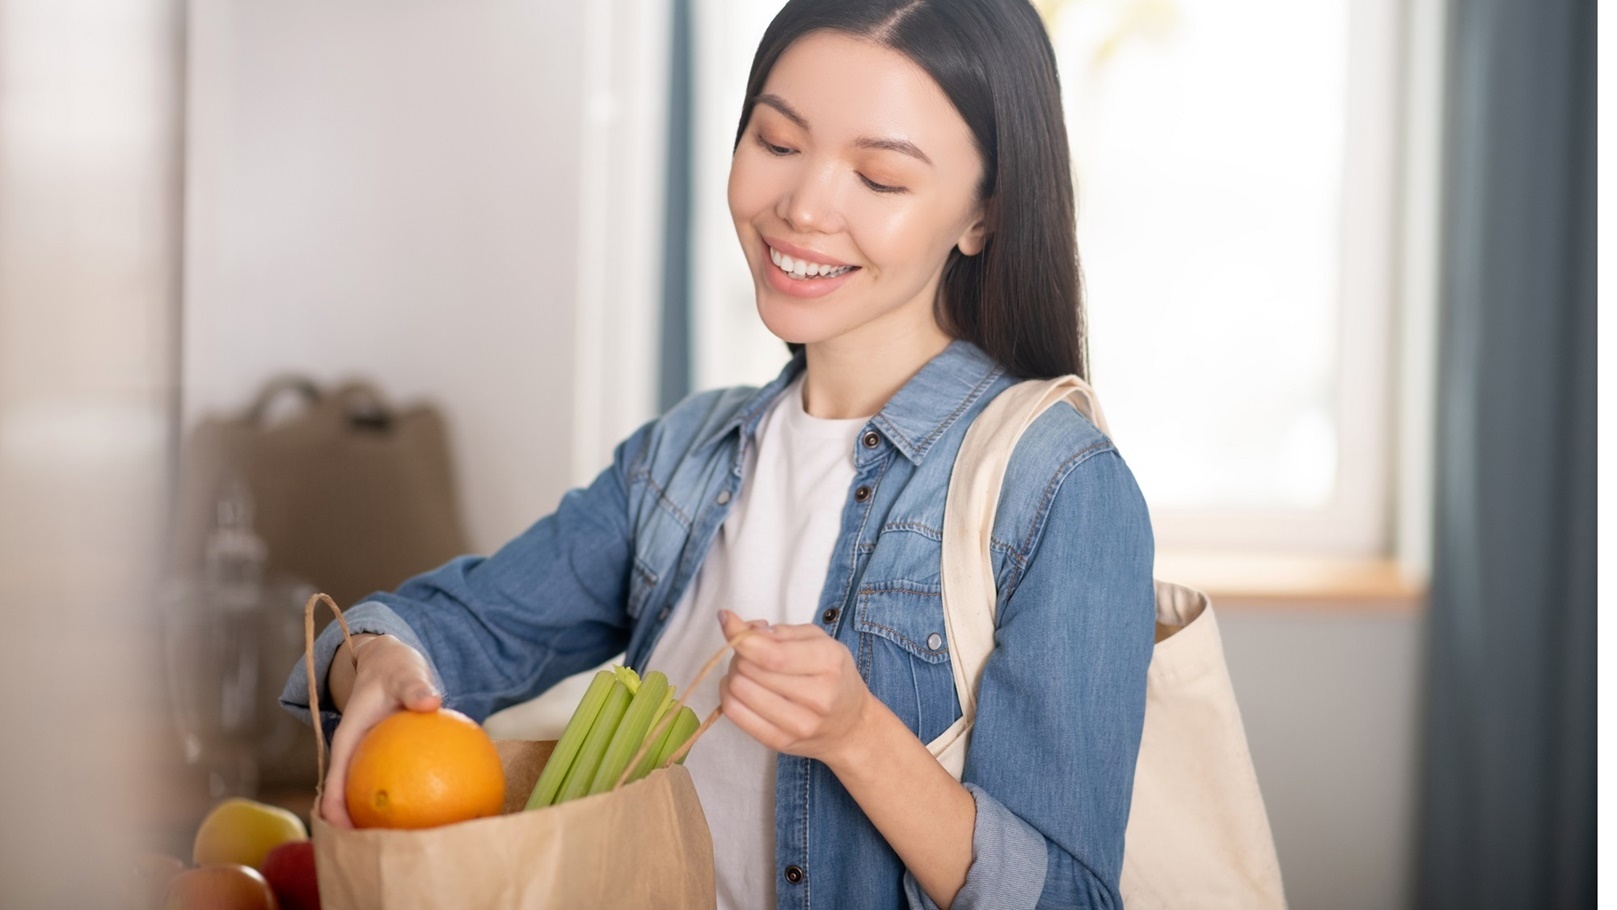 beautiful-young-woman-with-paper-bag-of-vegetables-2021-09-04-09-21-31-utc